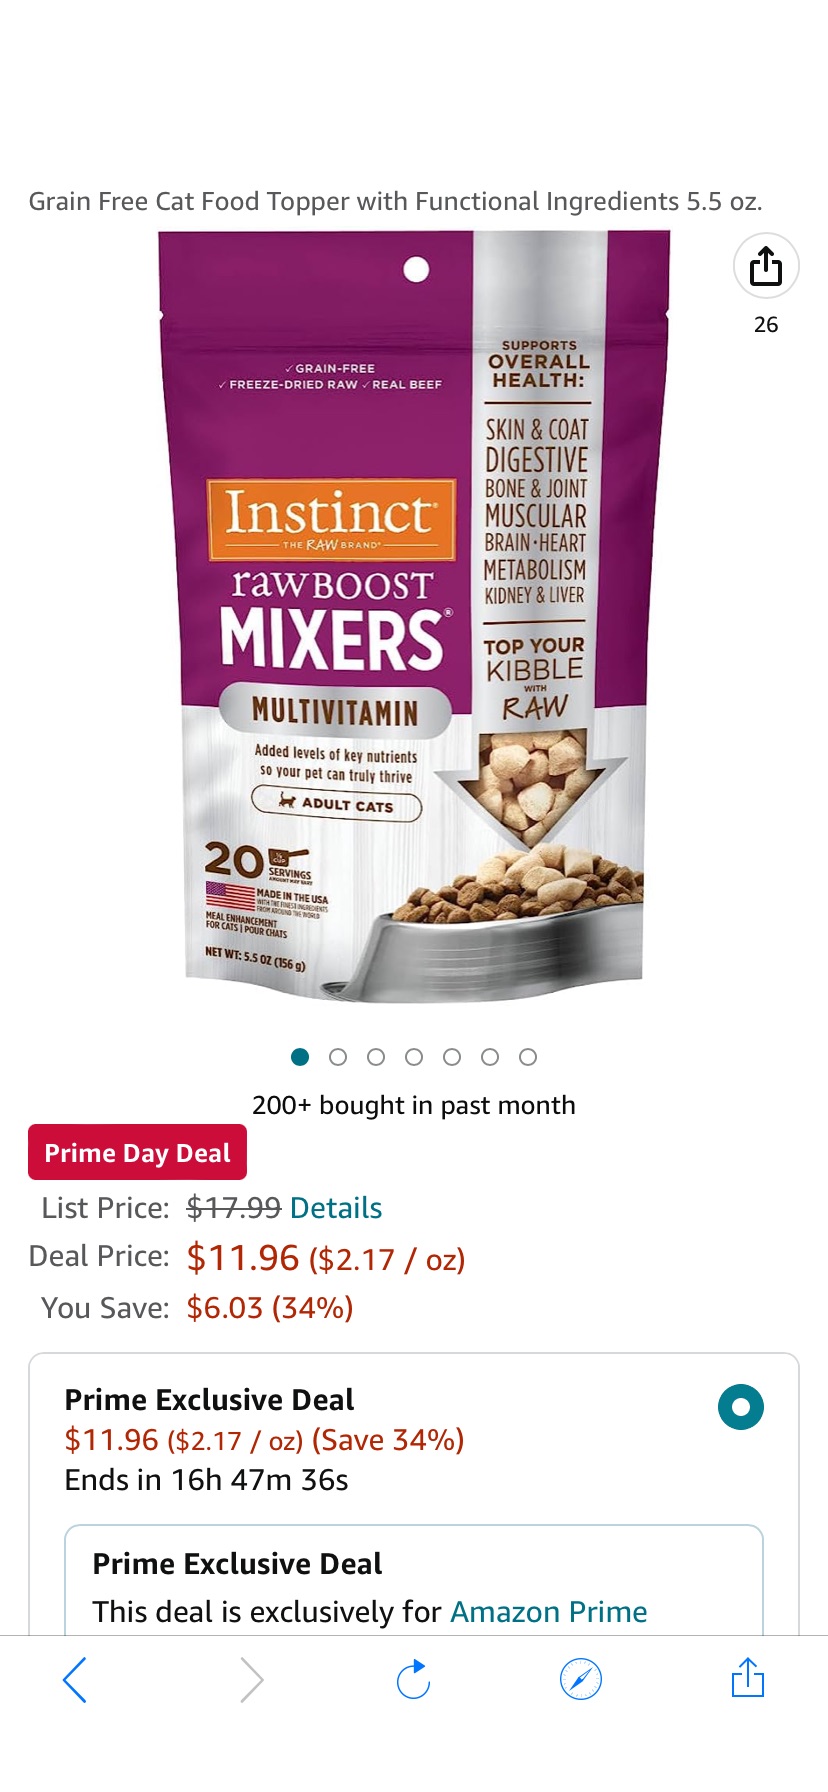 Amazon.com : Instinct 猫咪冻干零食Raw Boost Mixers Freeze Dried Raw Cat Food Topper, Grain Free Cat Food Topper with Functional Ingredients 5.5 oz. : Pet Supplies